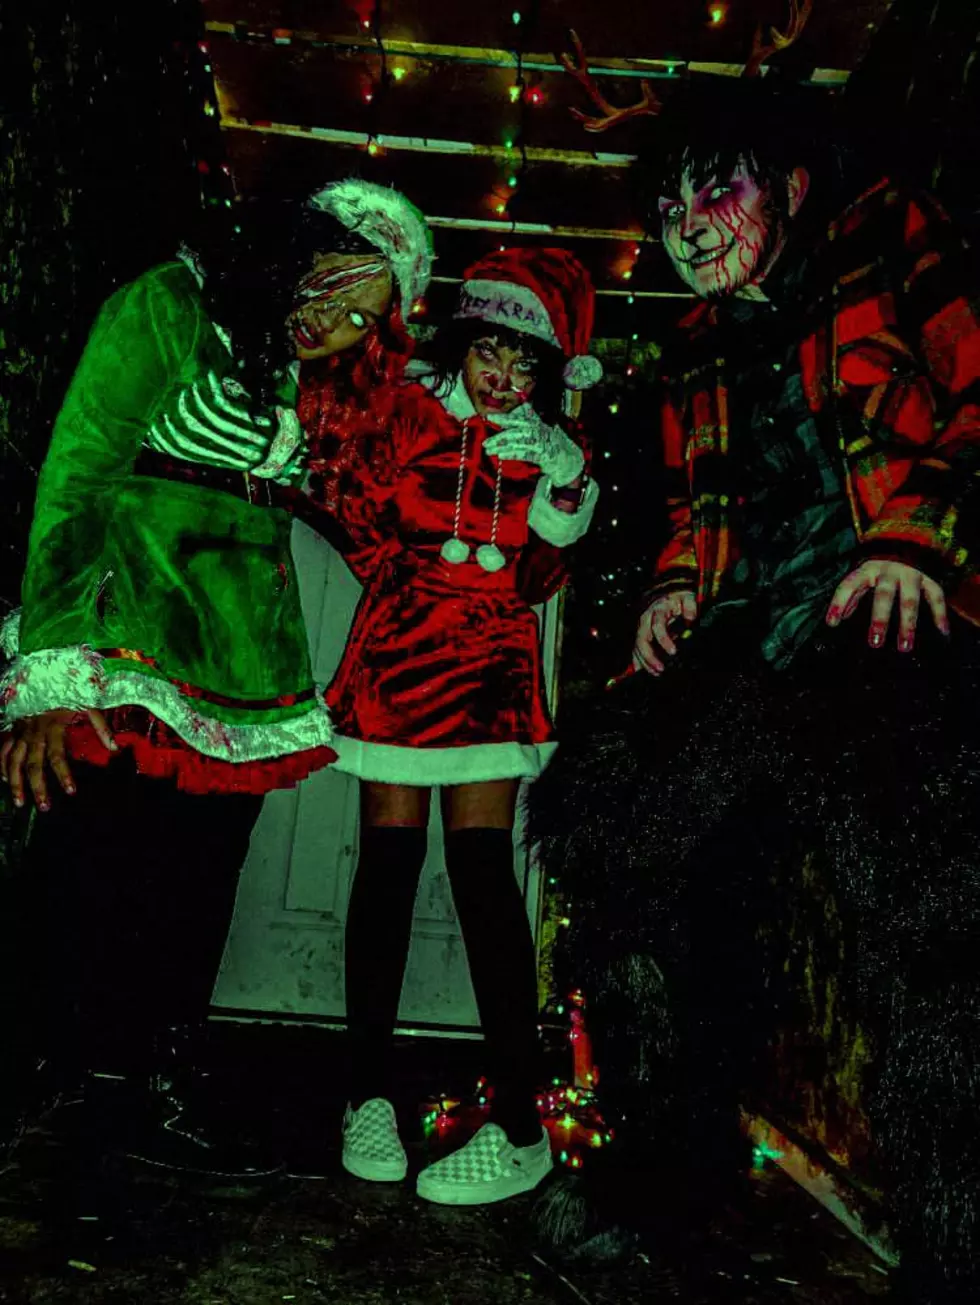 Indiana Haunted Attraction to Hold Christmas Themed Scare to Raise Money for Homeless Animals